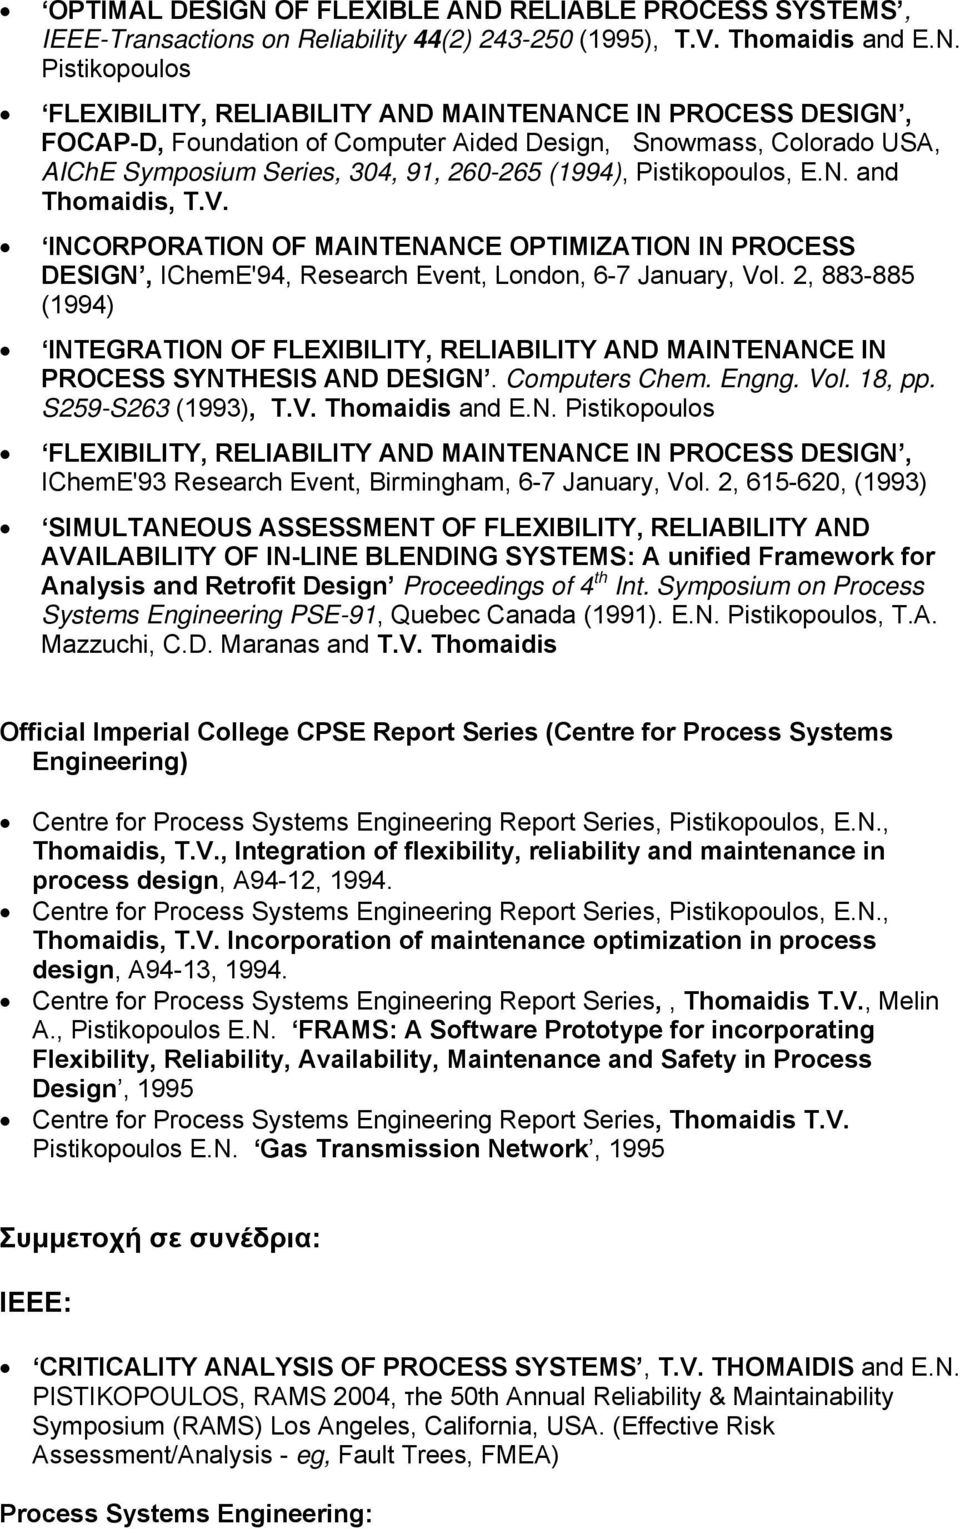 RELIABLE PROCESS SYSTEMS, IEEE-Transactions on Reliability 44(2) 243-250 (1995), T.V. Thomaidis and E.N.